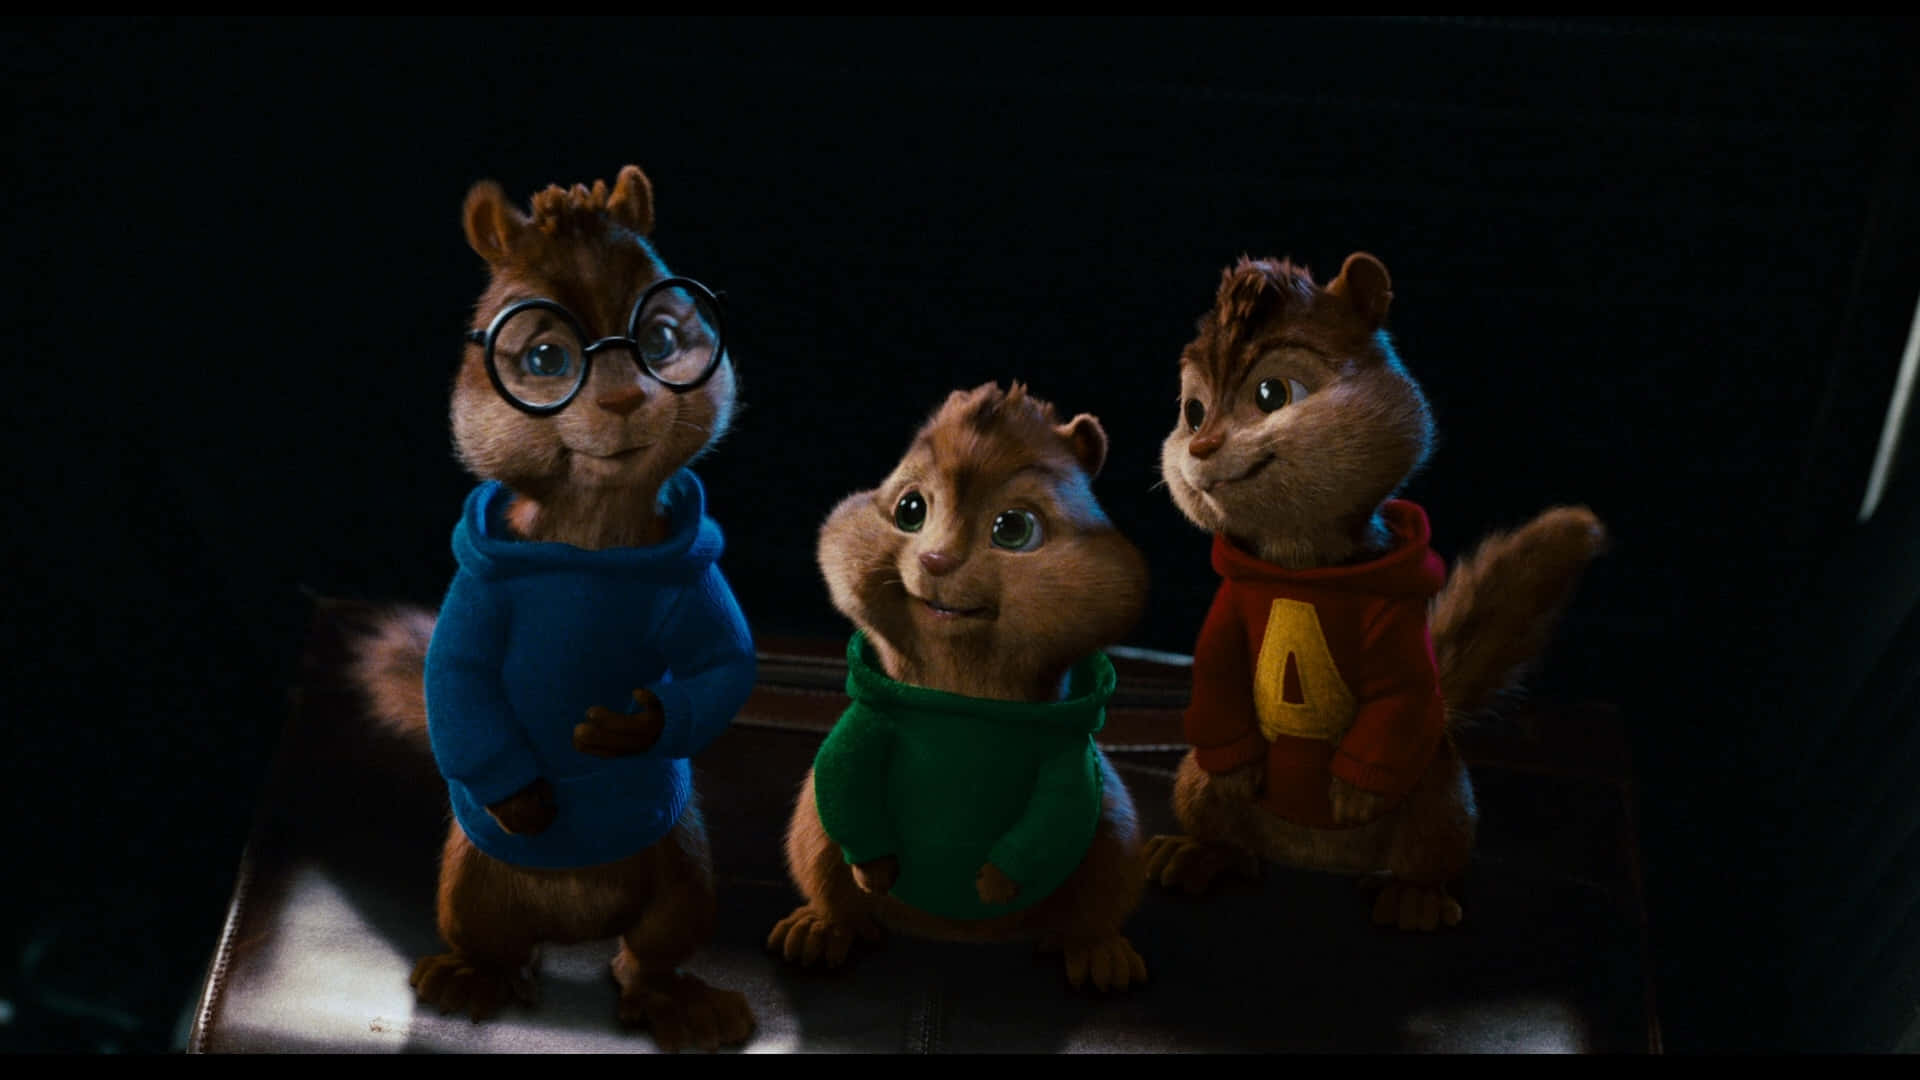 Alvin And The Chipmunks movie characters, Simon, Theodore and Alvin in a nostalgic moment